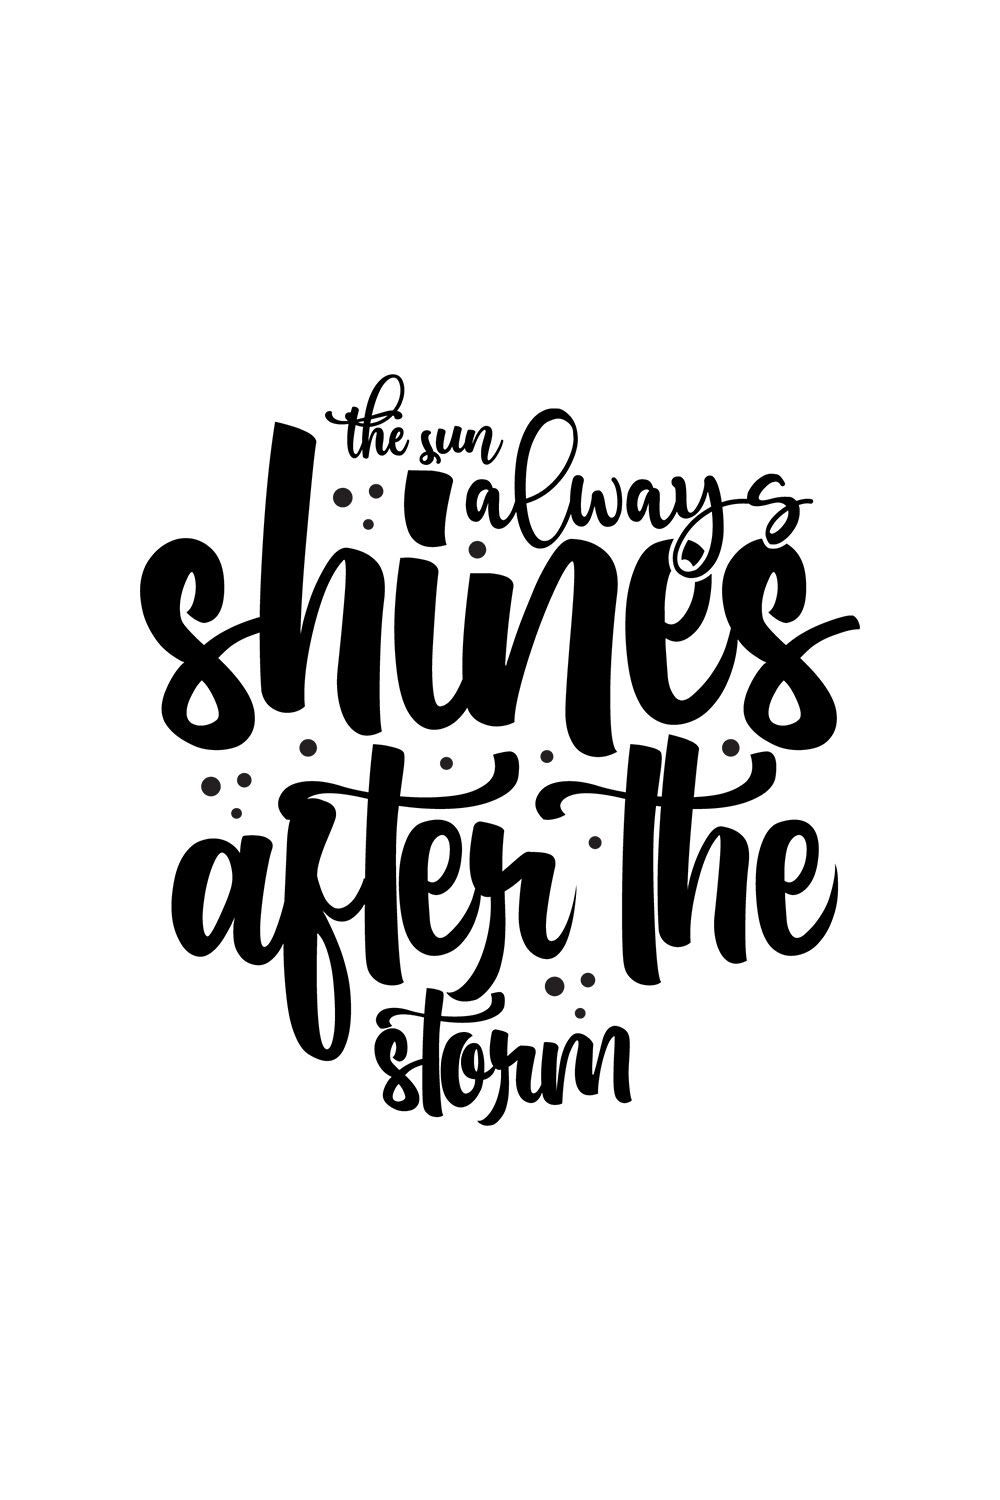 Image with exquisite black lettering for The Sun Always Shines After The Storm prints.